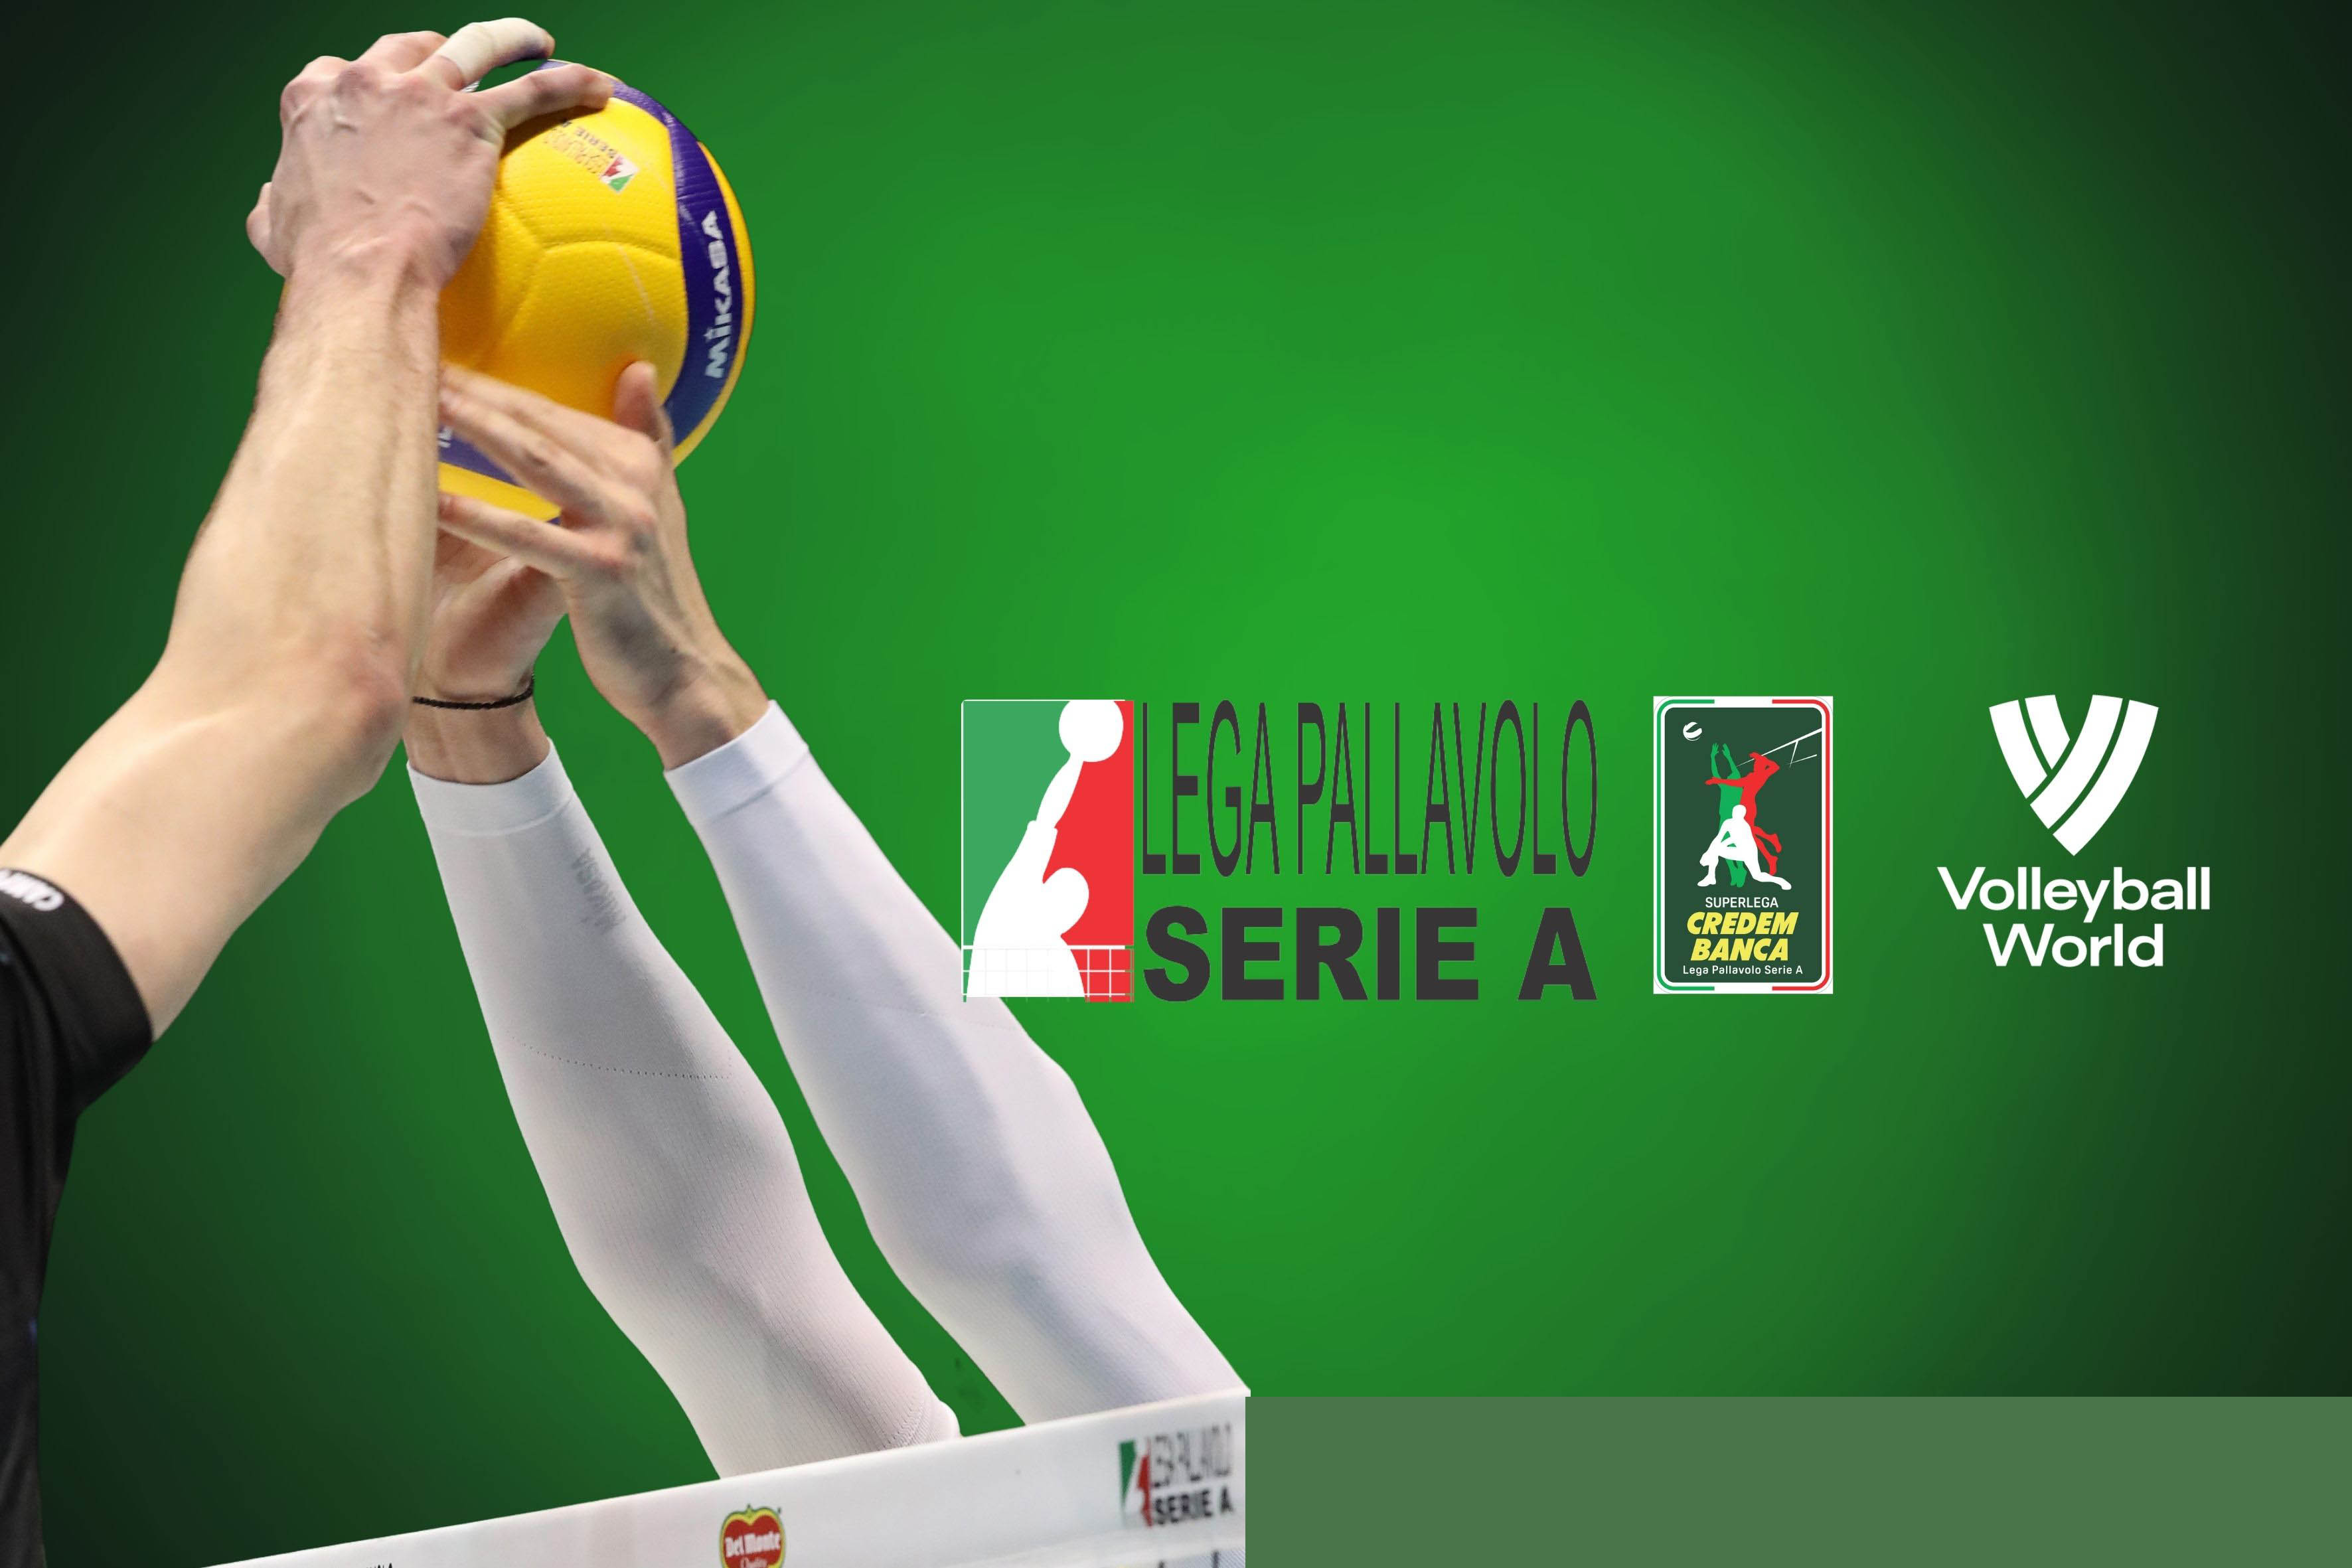 Volleyball World launches partnership with Lega Pallavolo Serie A Lega Pallavolo Serie A